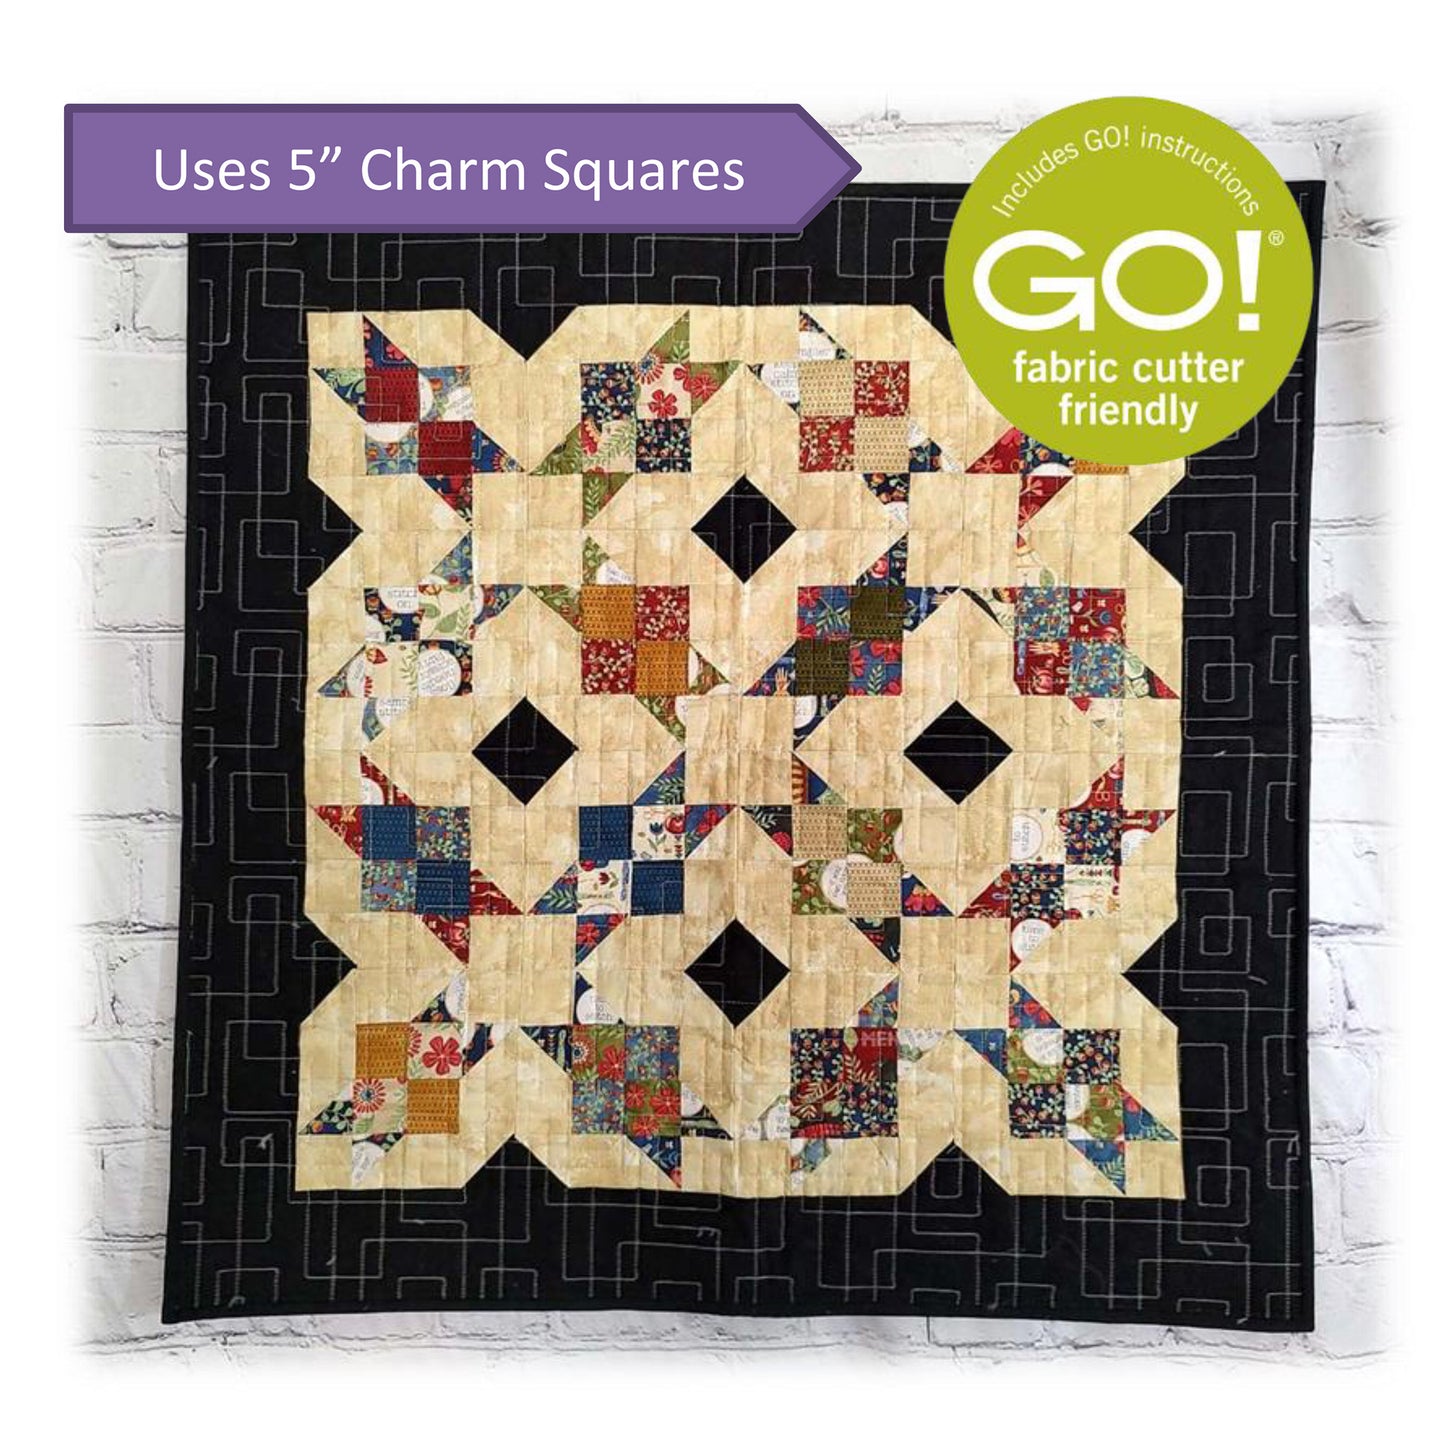 Charming quilt showcases a beautiful patchwork design with note about this pattern being Accuquilt GO! fabric cutter friendly and that it uses 5-inch charm squares.